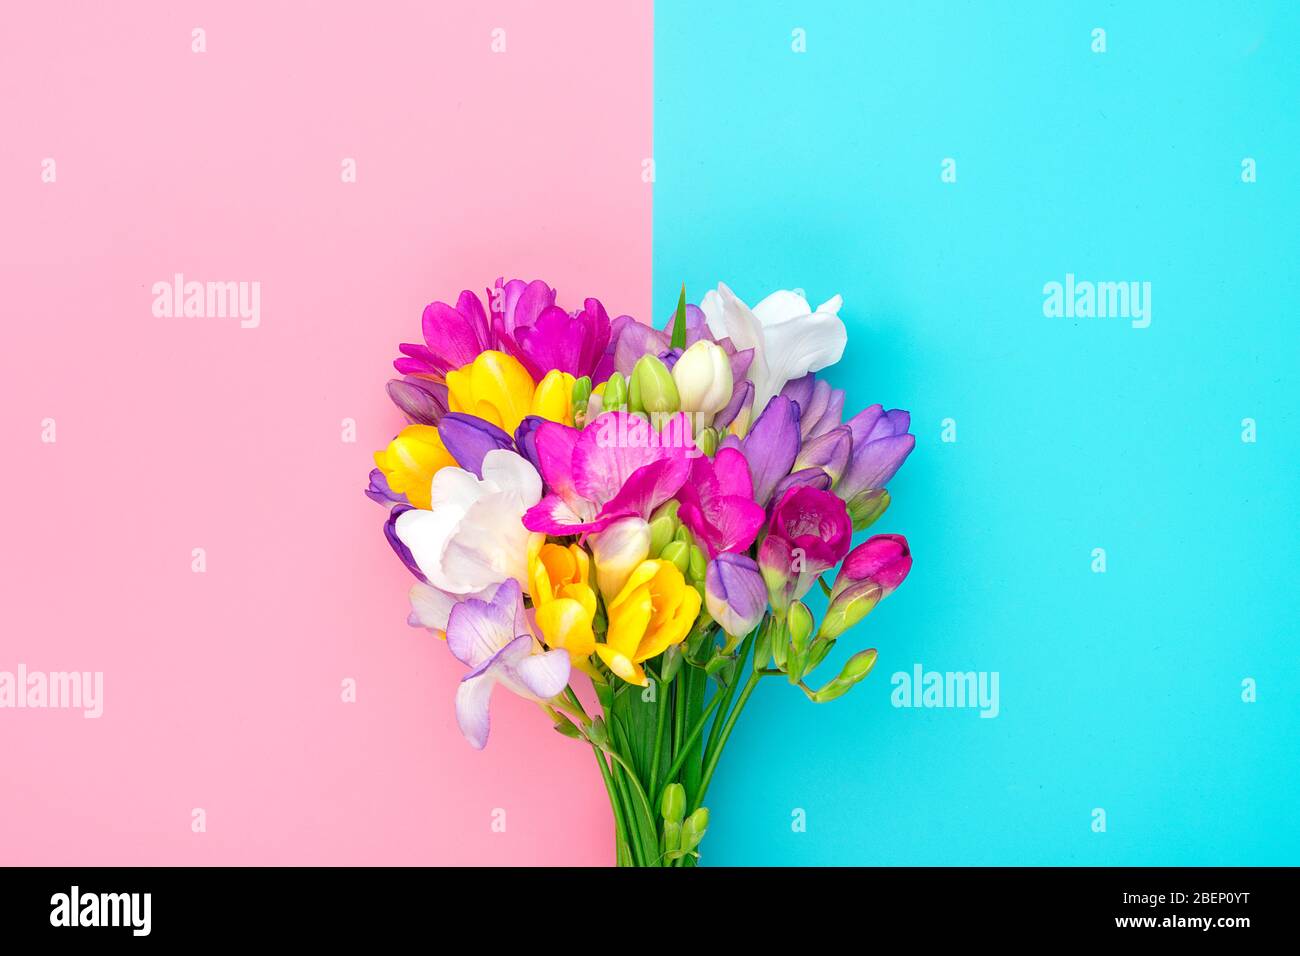 Bouquet of sprig freesia flowers isolated on pink, blue background Floral holiday card Top view Flat lay. Stock Photo